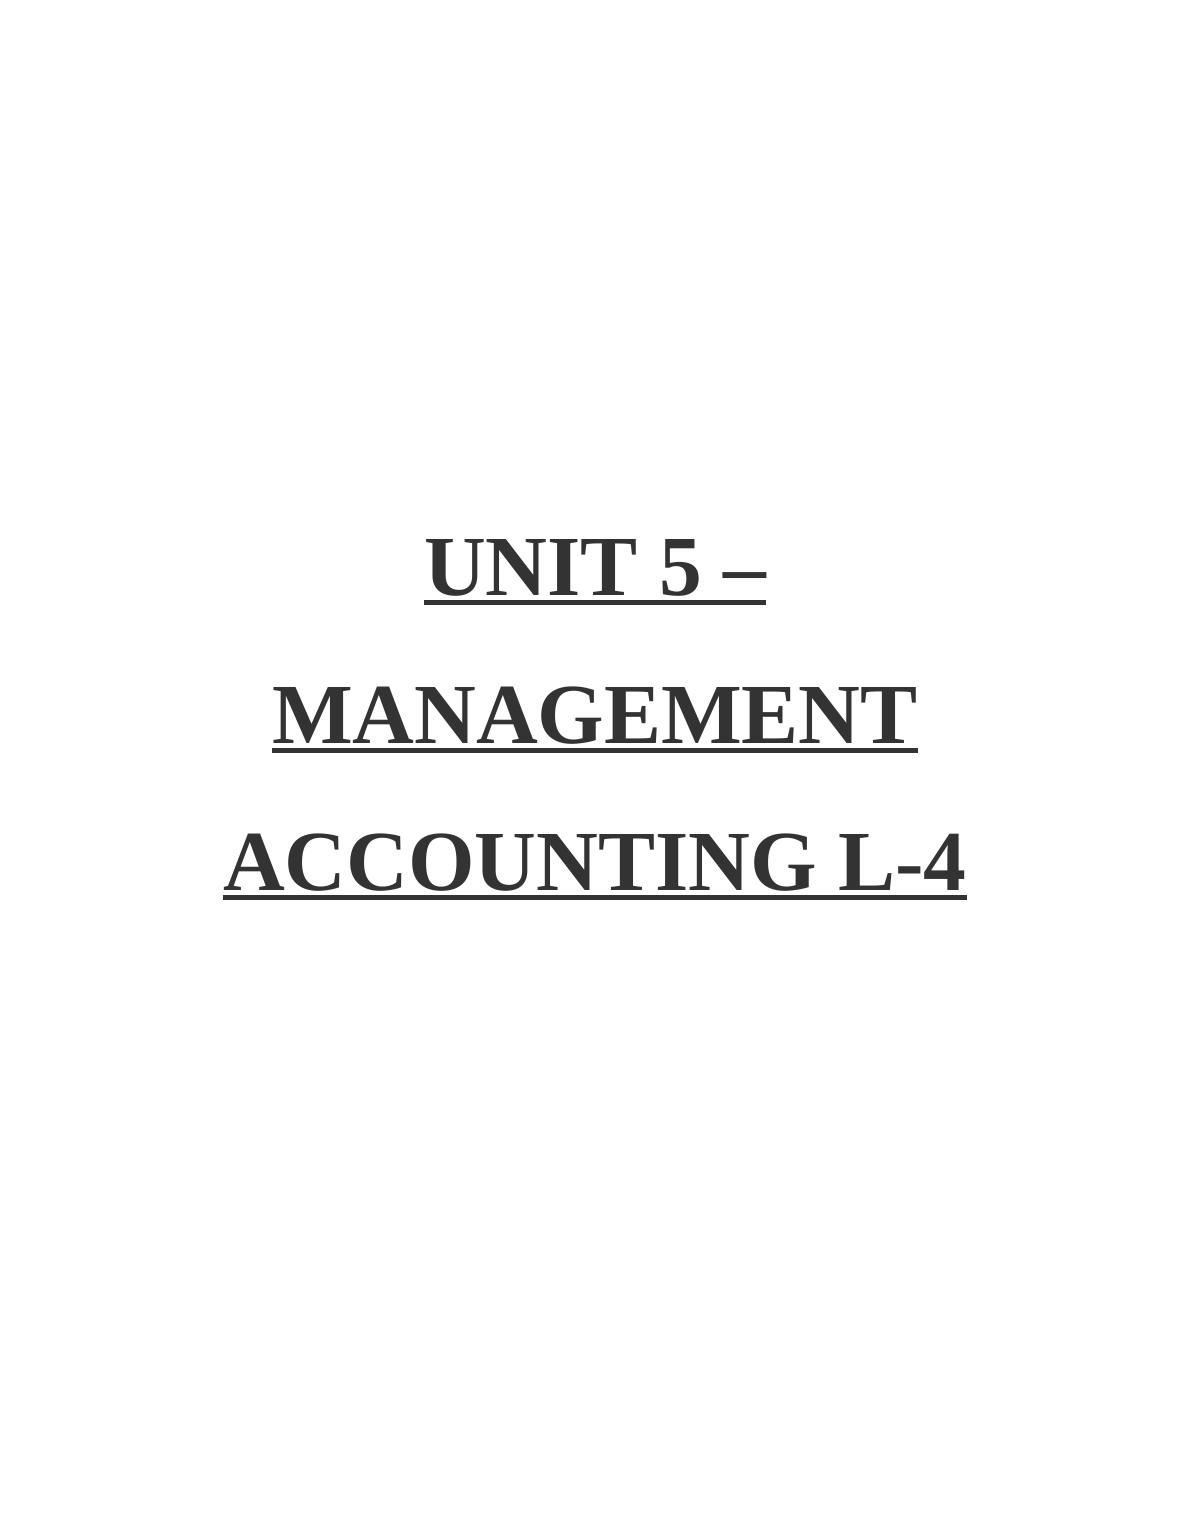 Unit 5 - Management Accounting Assignment_1